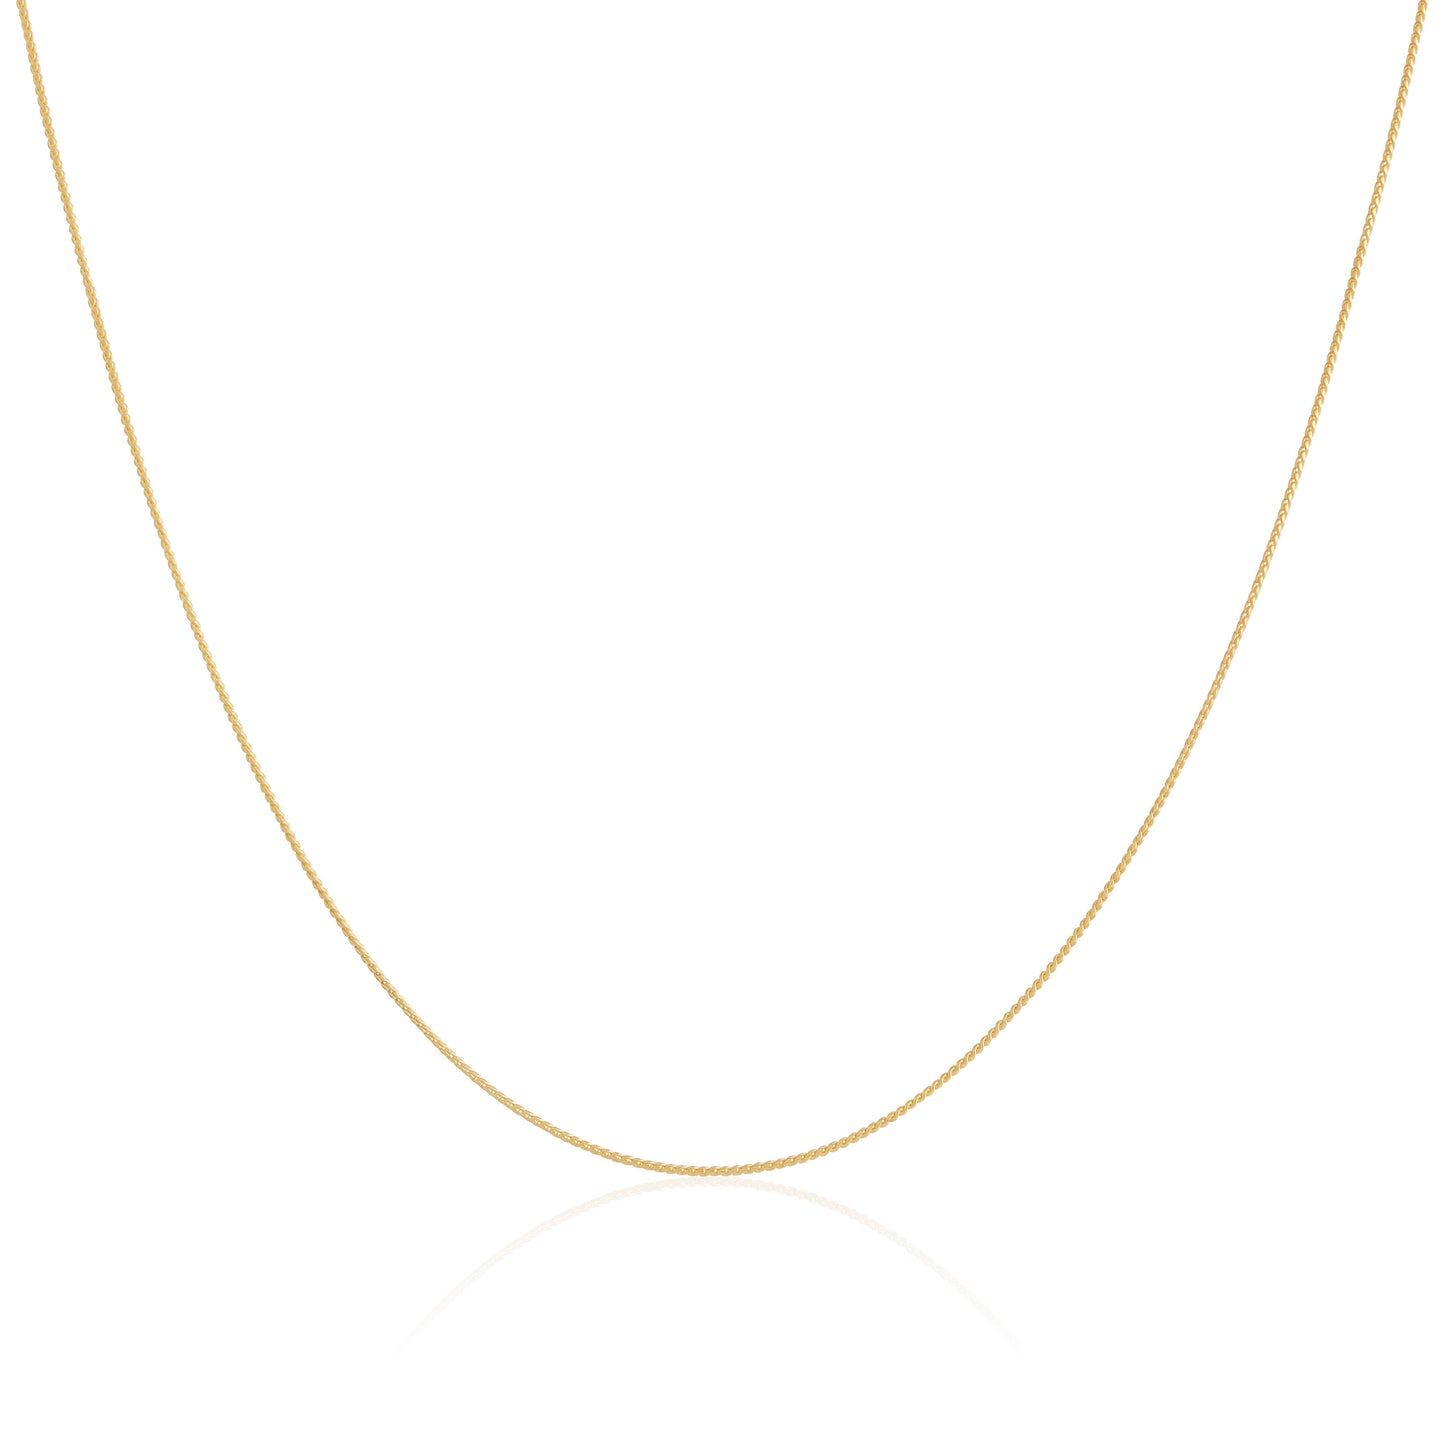 Gold Plated Sterling Silver Foxtail Chain 14 - 22 Inches